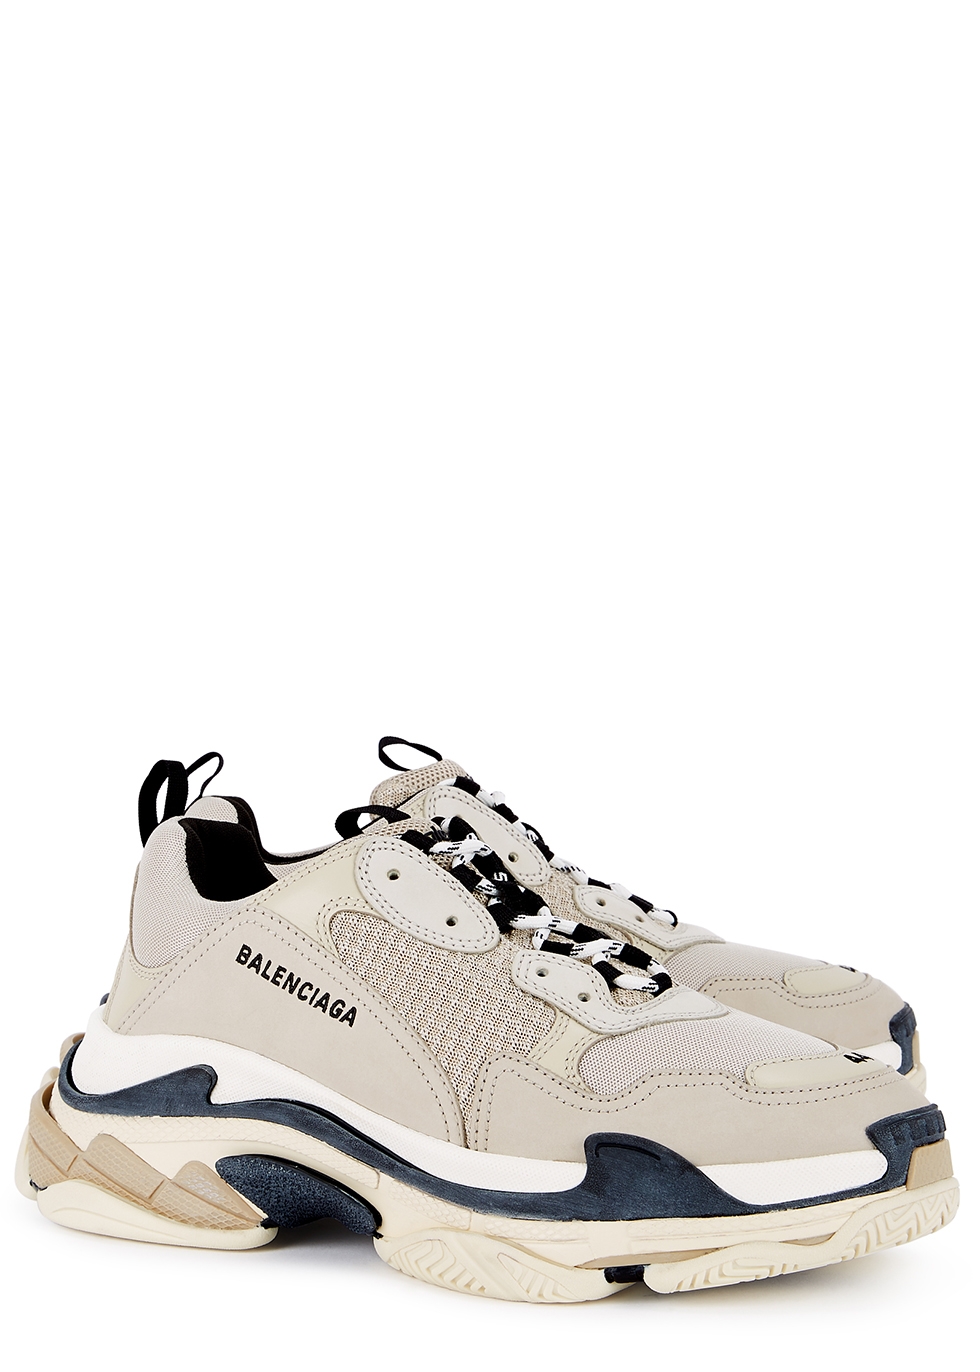 The pair of white sneakers Balenciaga triple S on the account